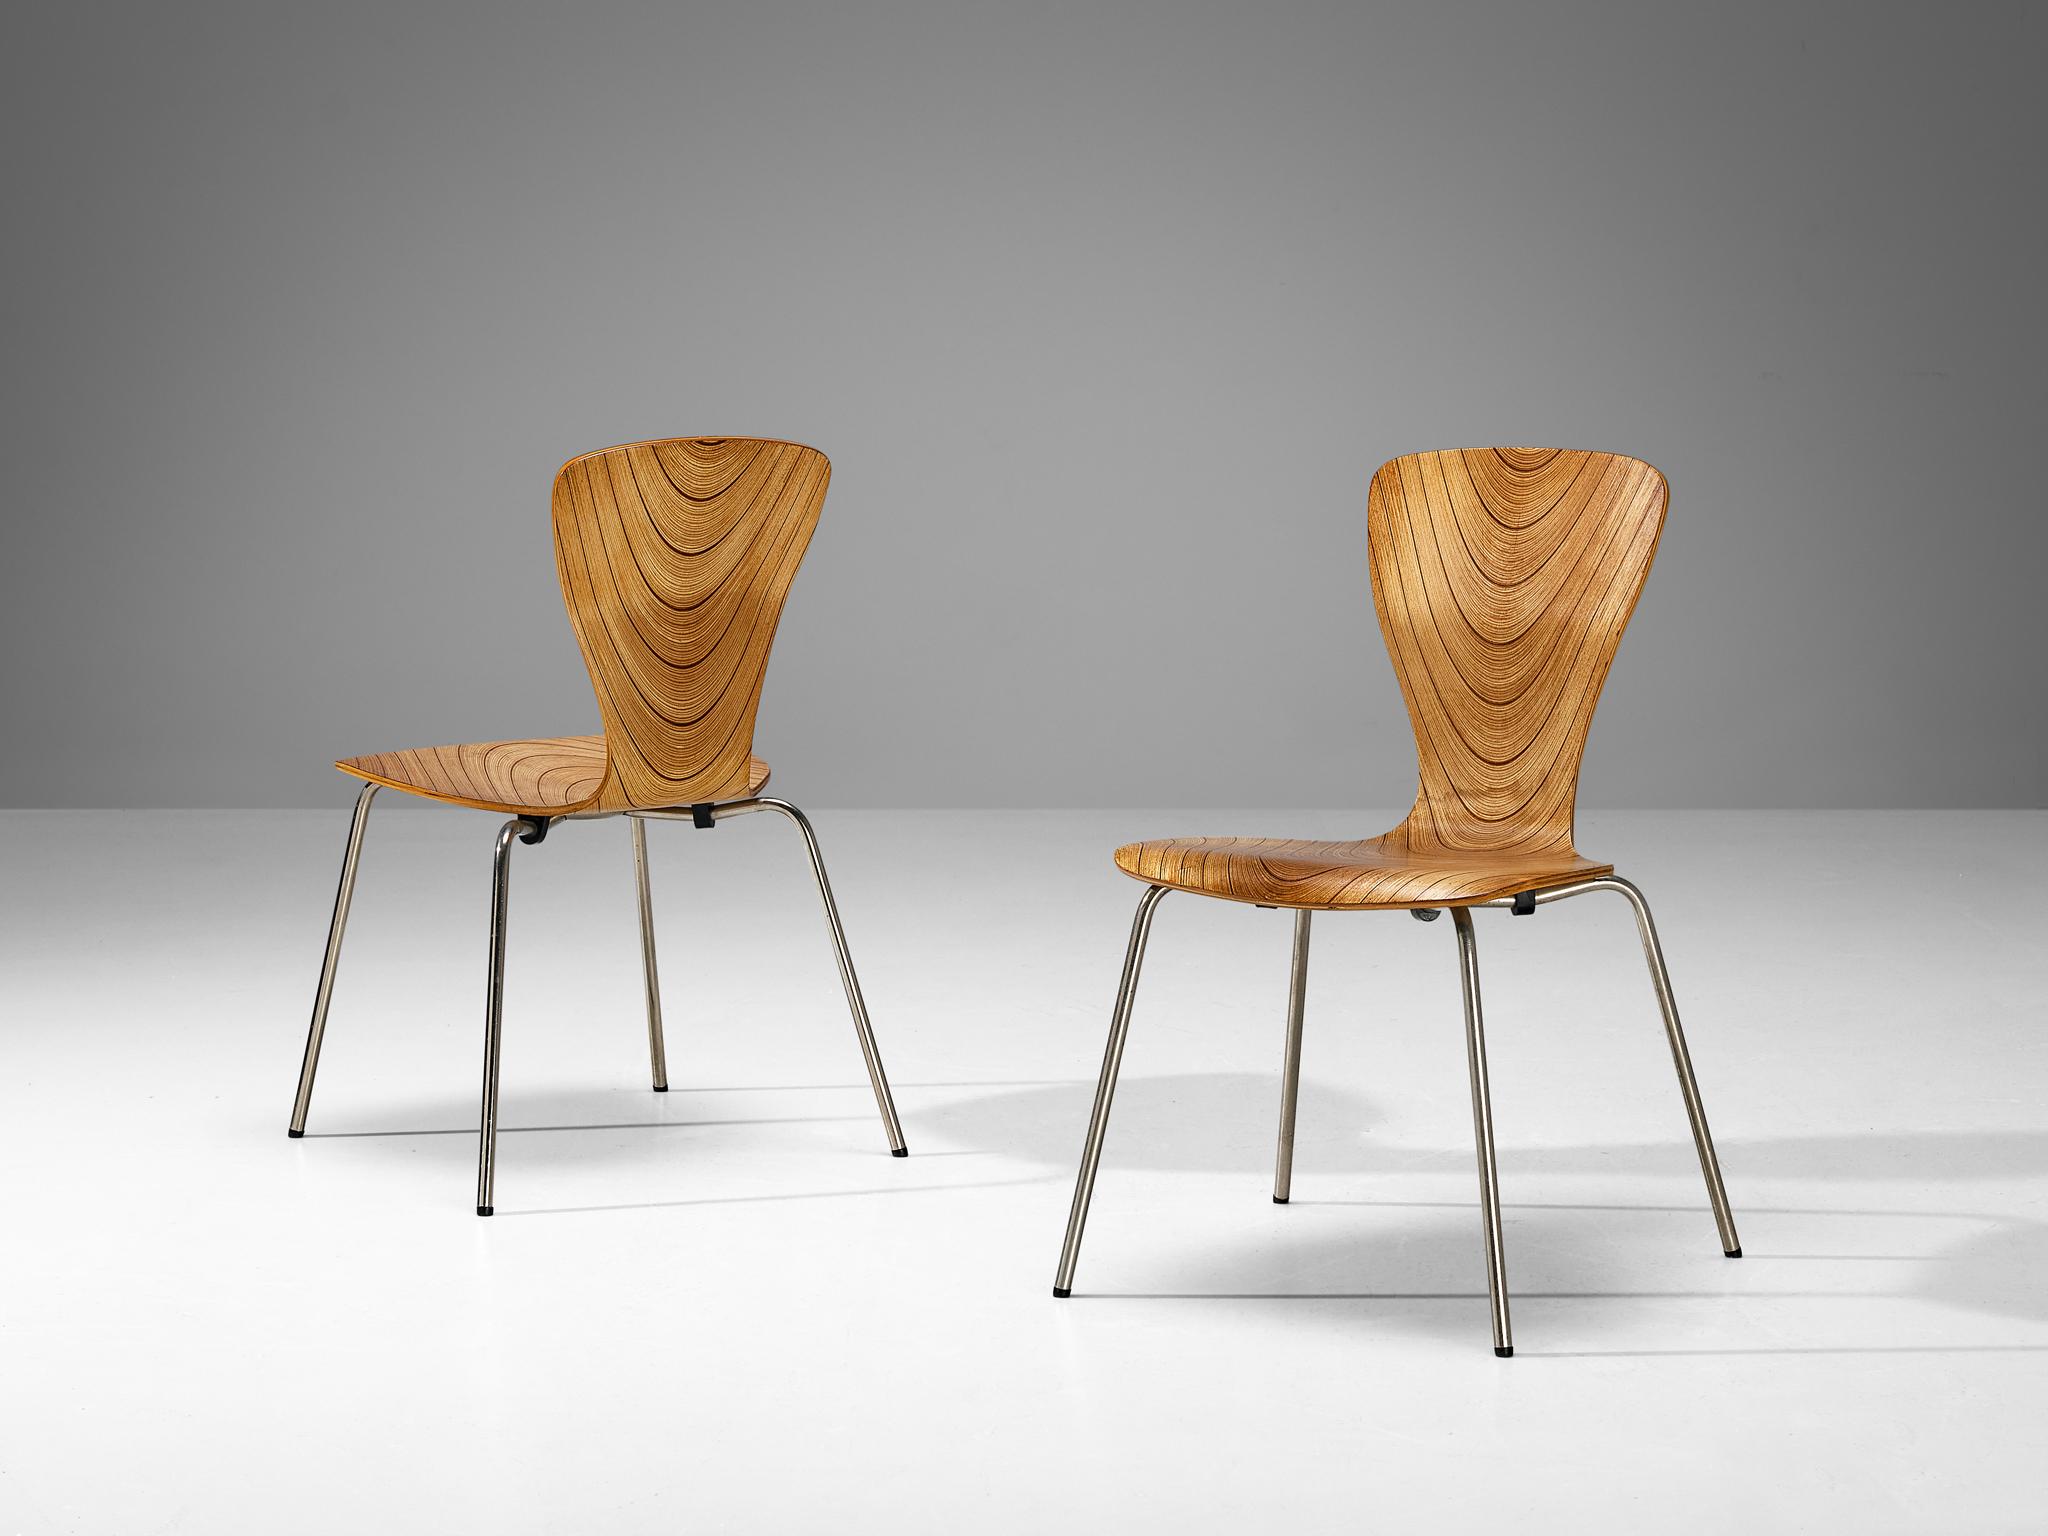 Tapio Wirkkala, pair of dining chairs, metal, plywood, Finland, 1960s

This exceptional pair of chairs by Finnish designer Tapio Wirkkala shows a beautiful and dynamic play of lines that structure the seat and backrest in their appearance. Reminding